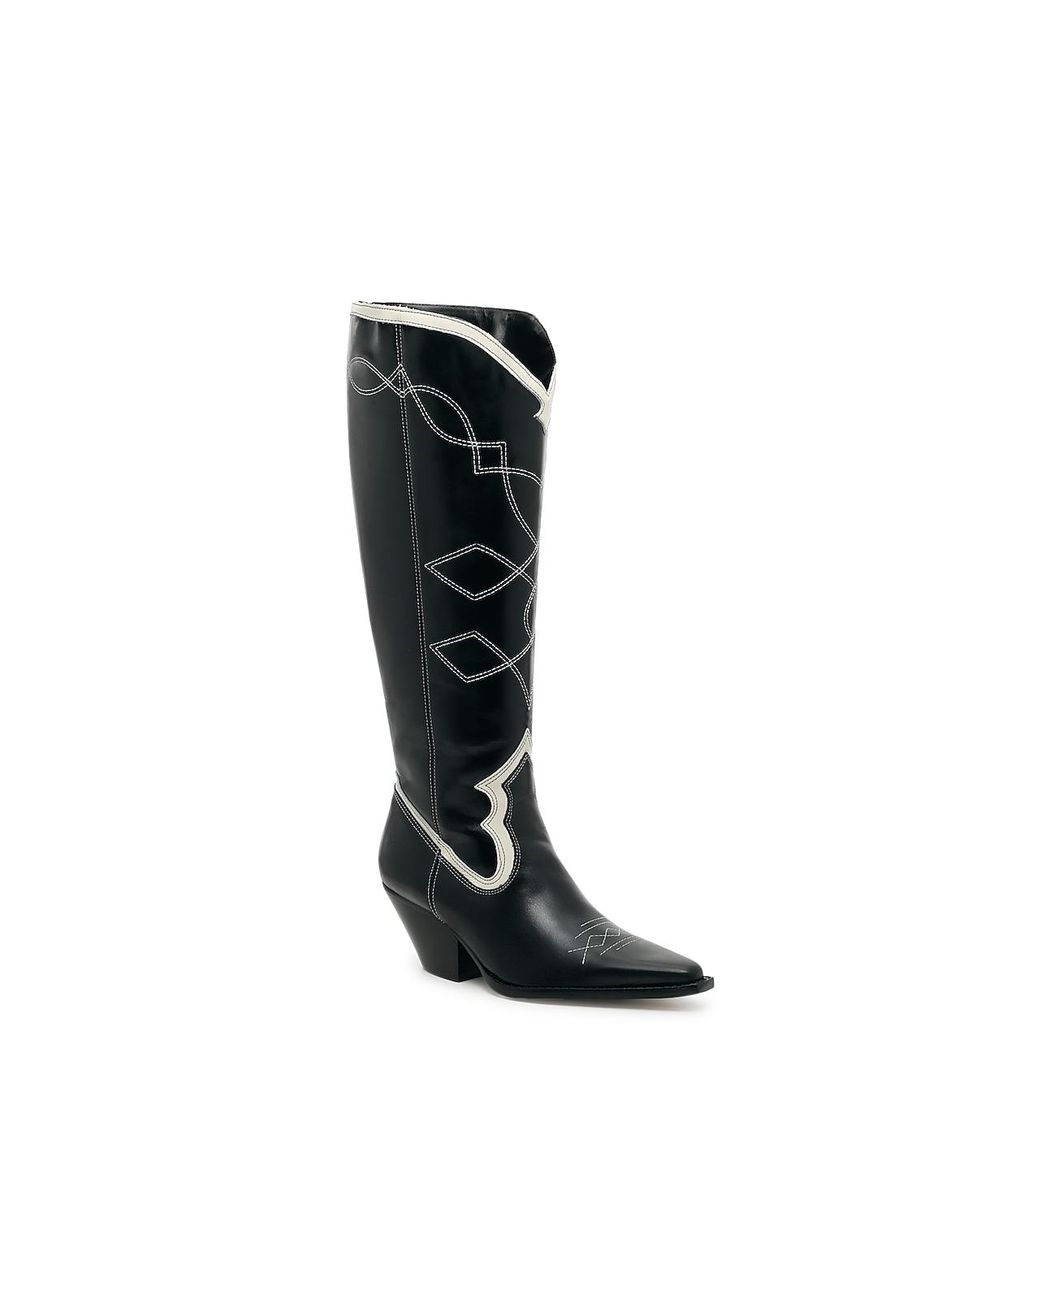 Vince Camuto Nedema Western Boot in Black | Lyst